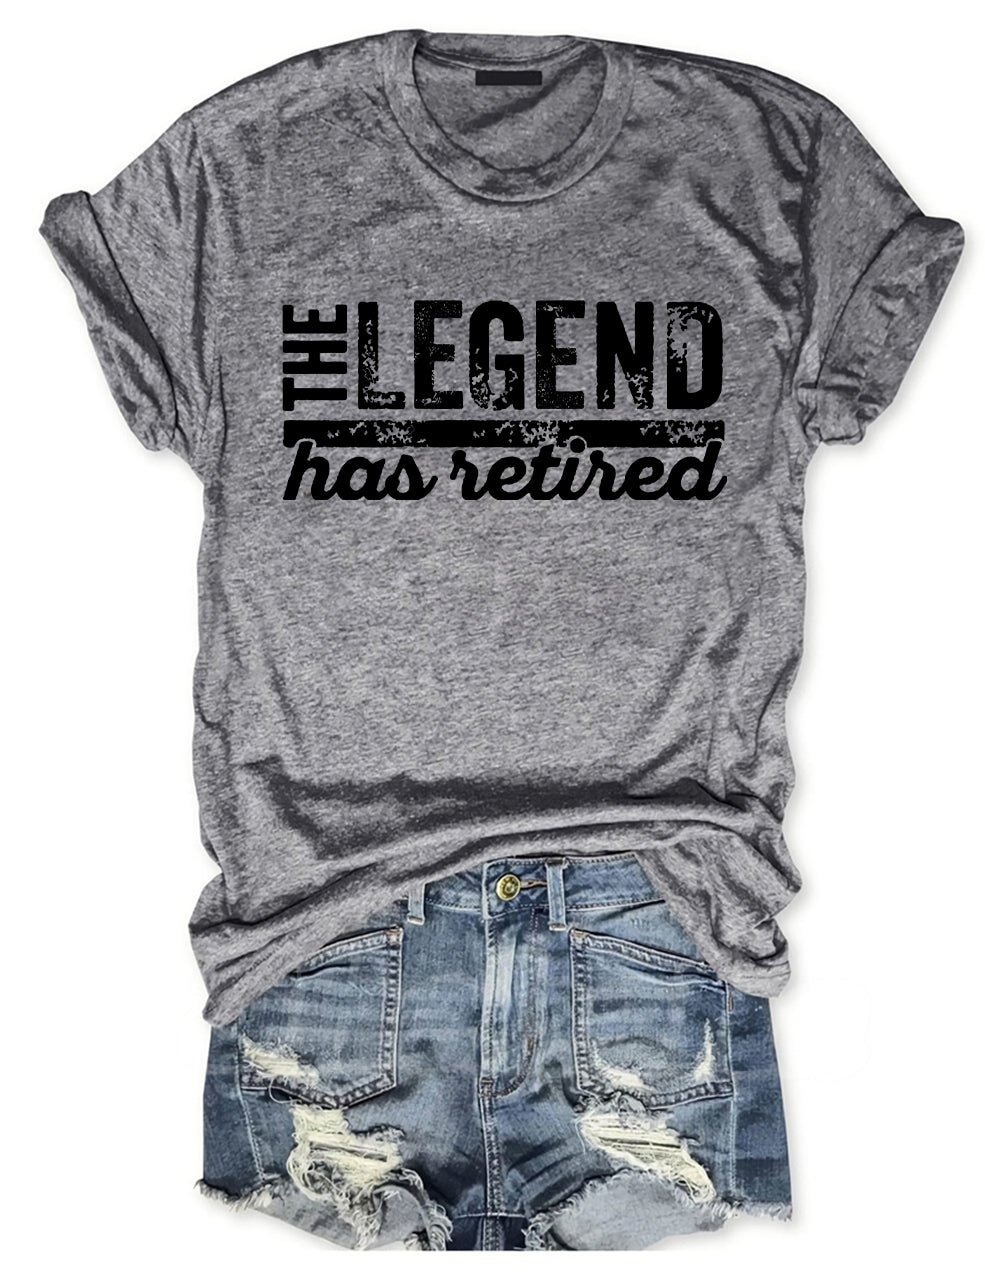 The Legend Has Retired T-shirt